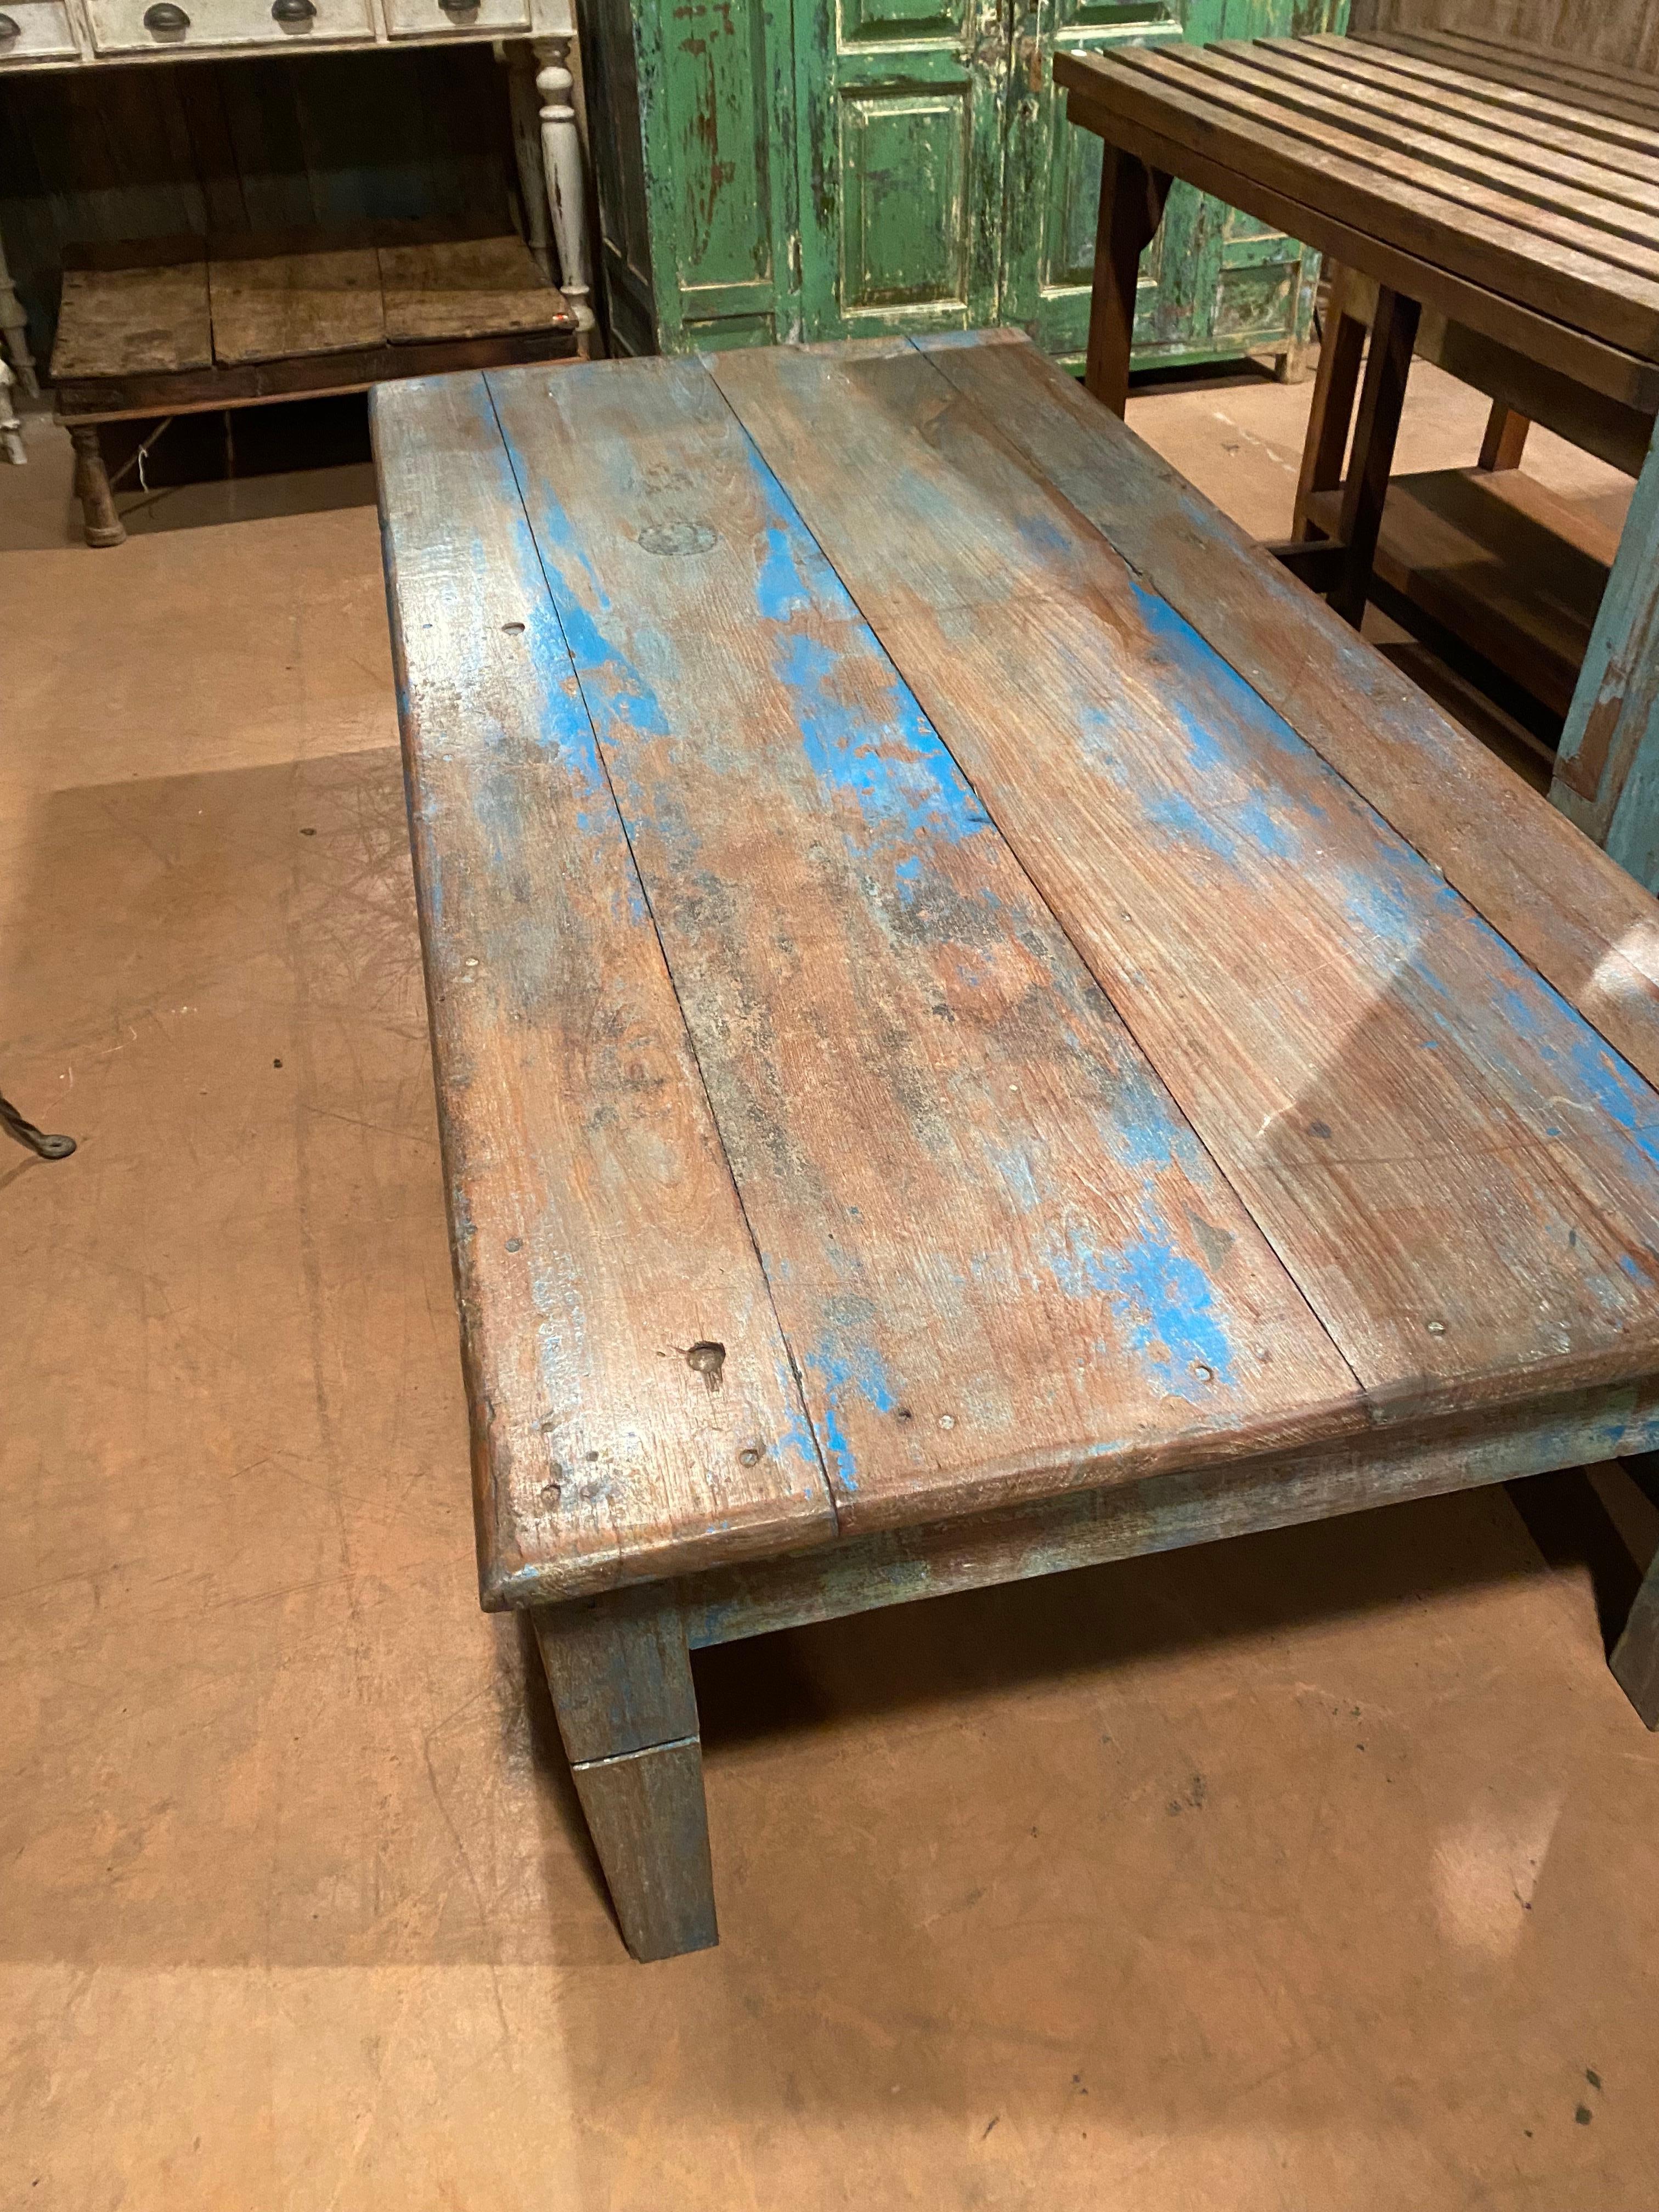 Delightful Indian coffe table with blue original patina. It can stay outside as it is made in teak wood.
Excellent condition.